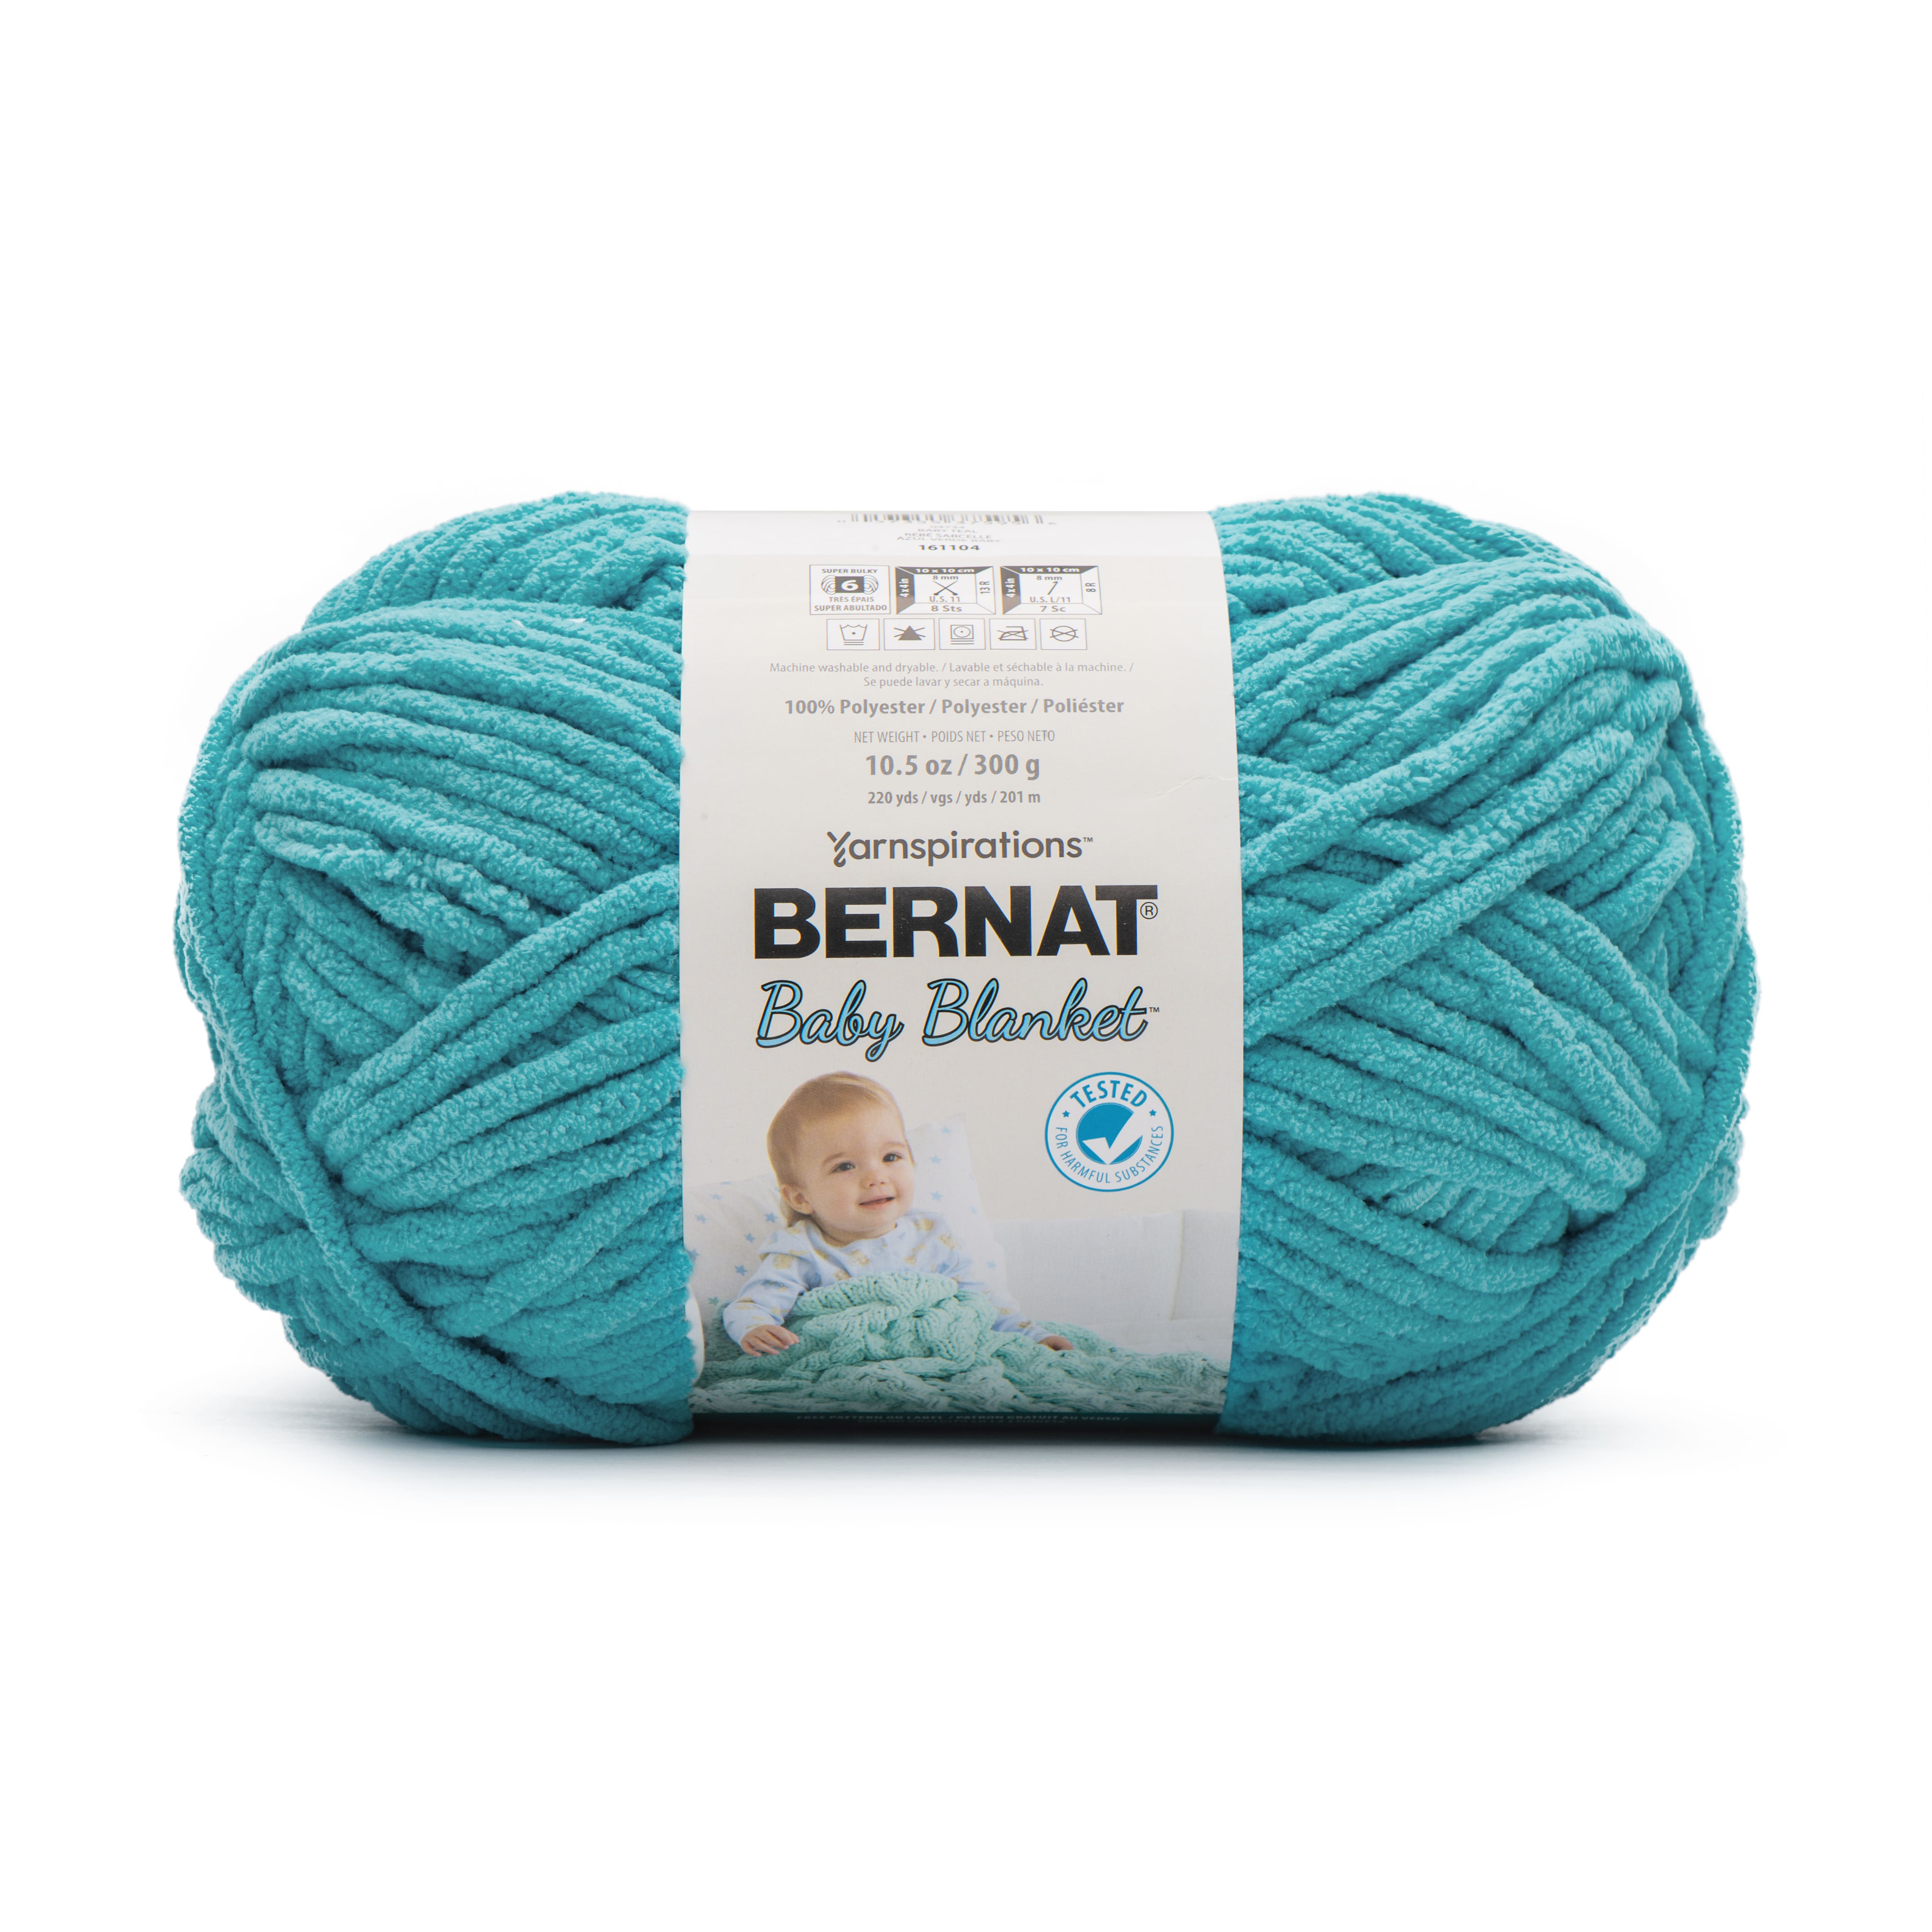 Bebe TAMM [200grs] - Soft Yarn for Baby Clothes and Blankets